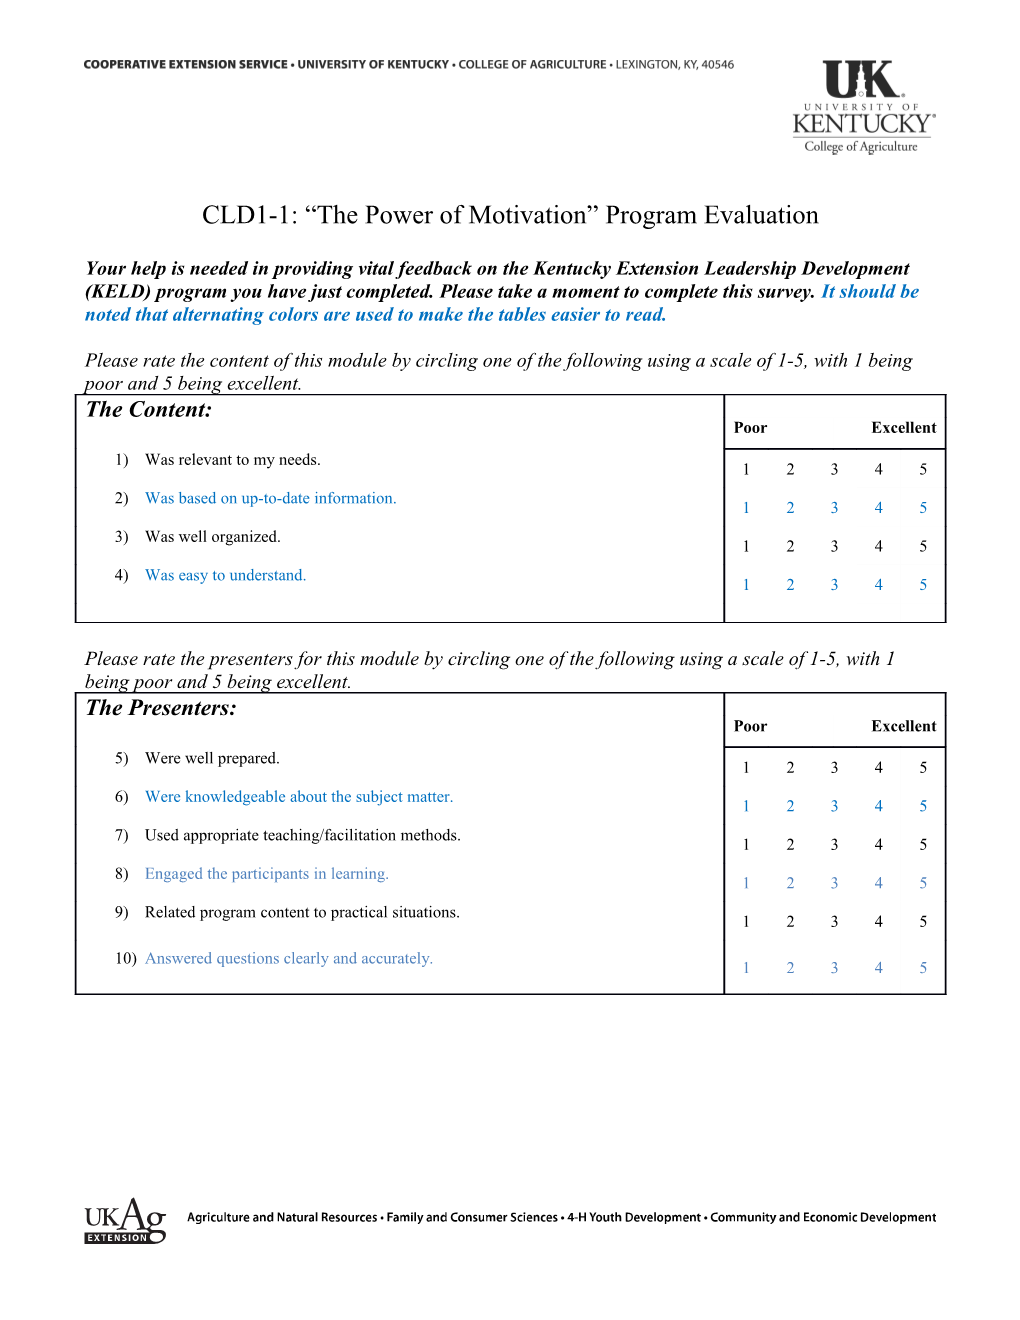 CLD1-1: the Power of Motivation Program Evaluation